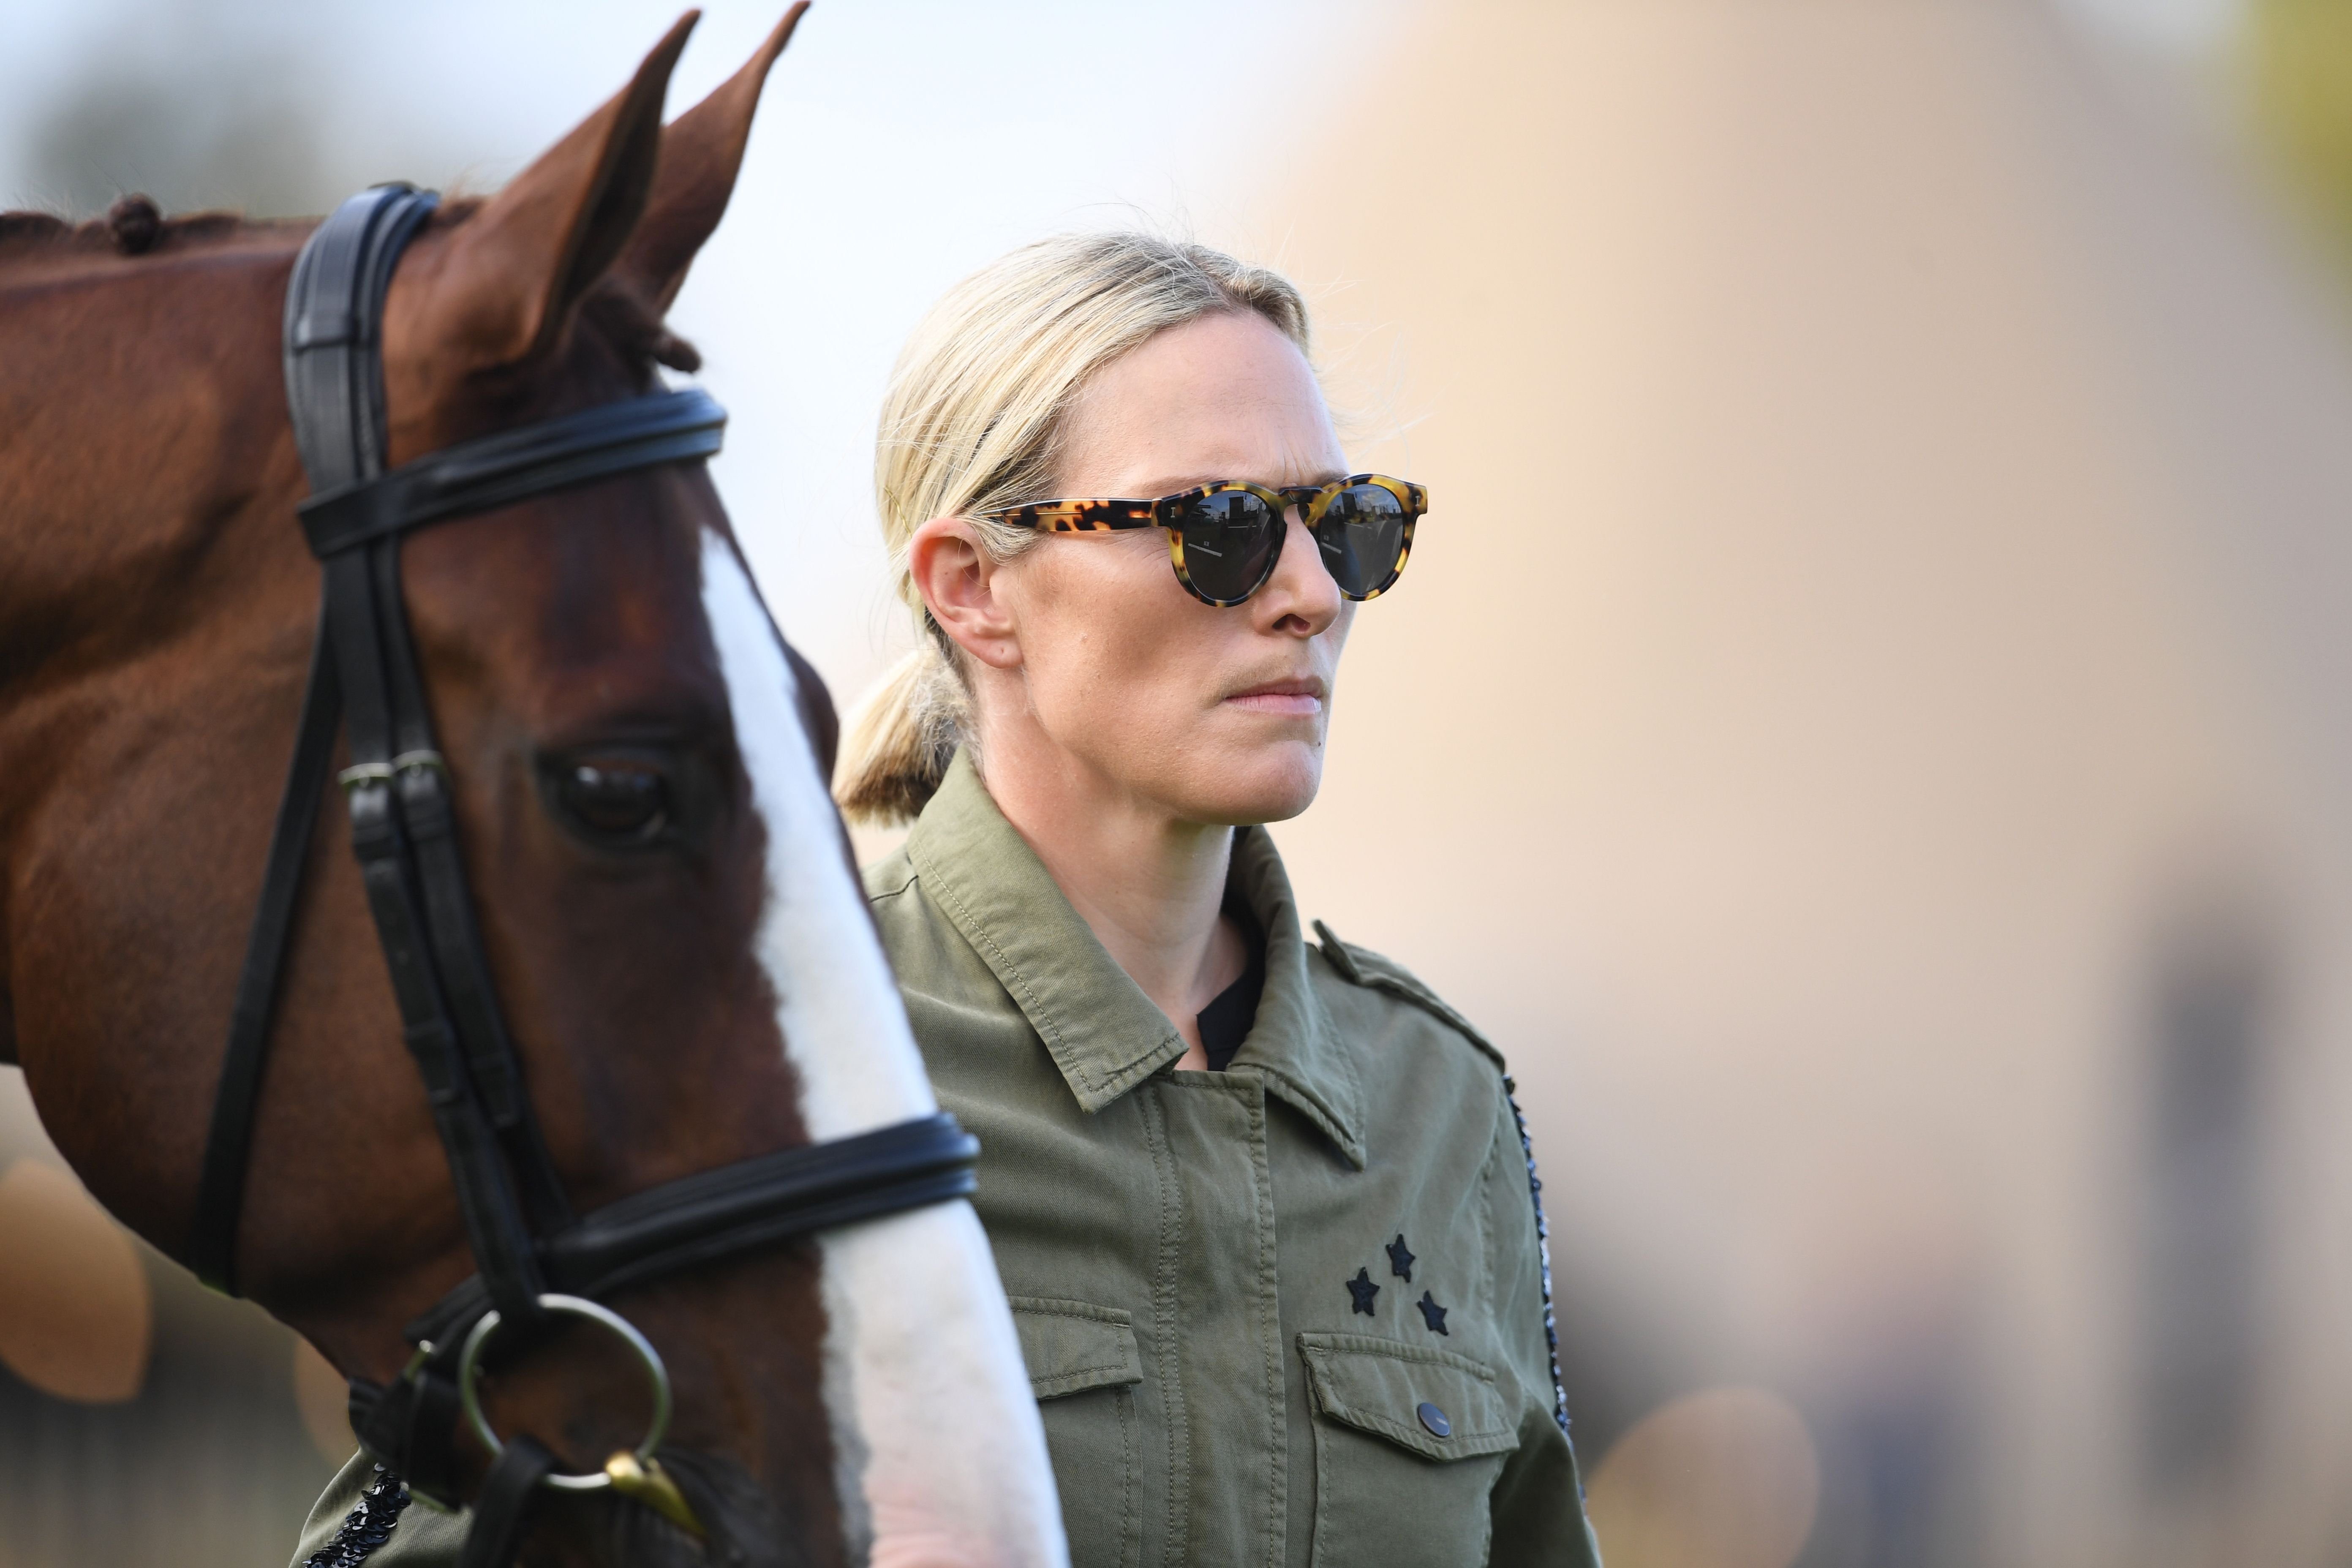 Zara Tindall at the Land Rover Burghley Horse Trials on September 04, 2019 | Photo: Getty Images